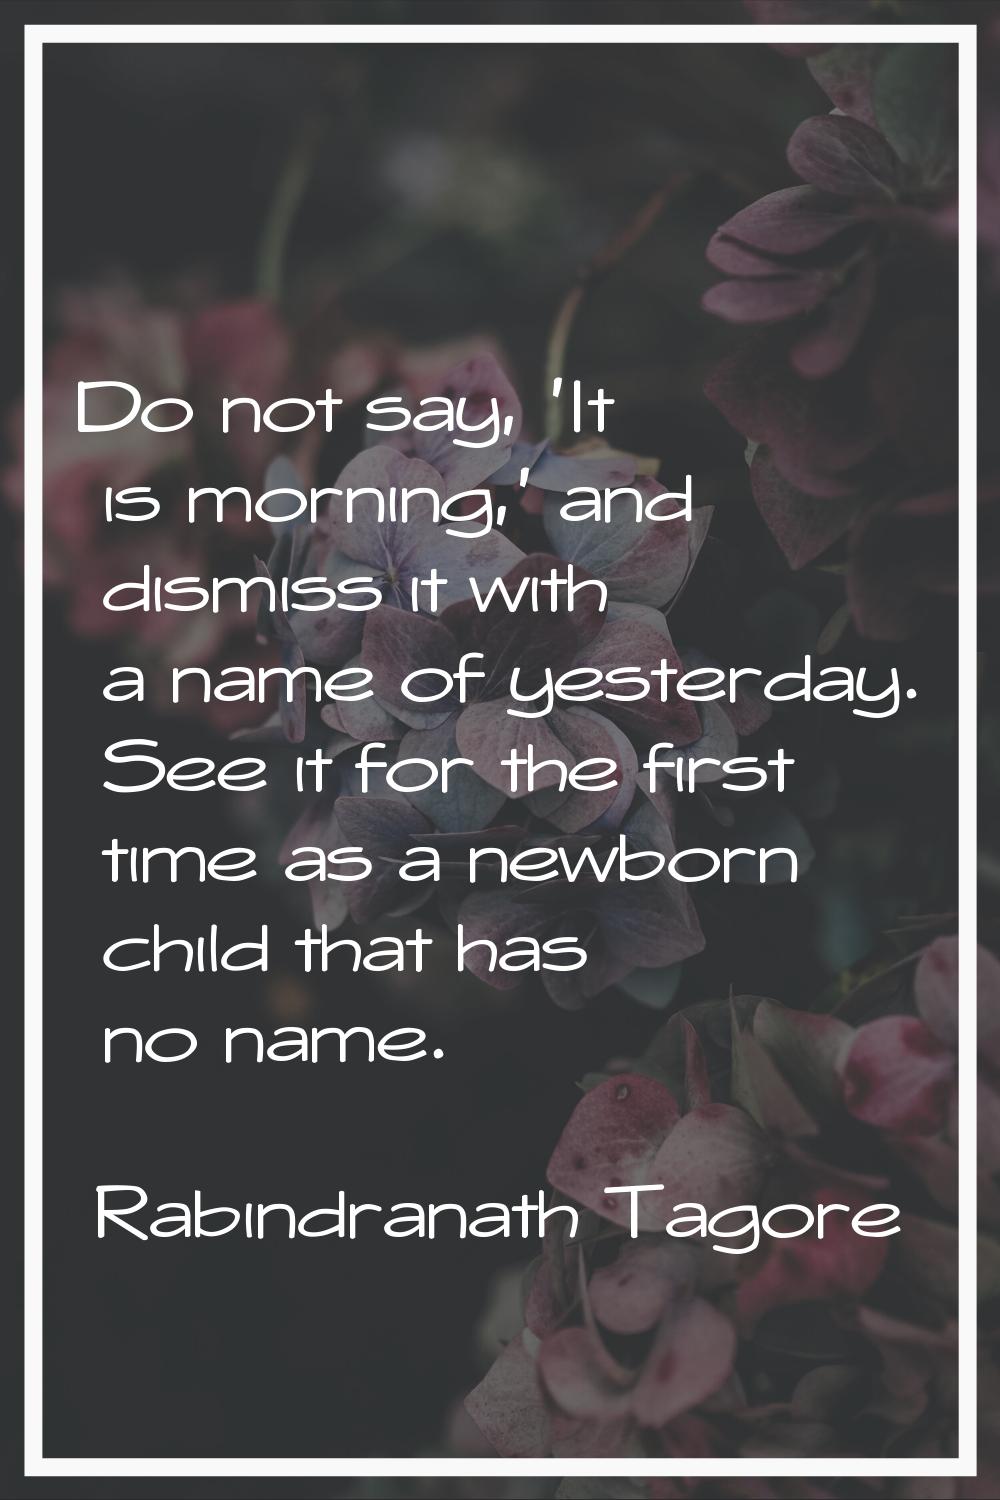 Do not say, 'It is morning,' and dismiss it with a name of yesterday. See it for the first time as 